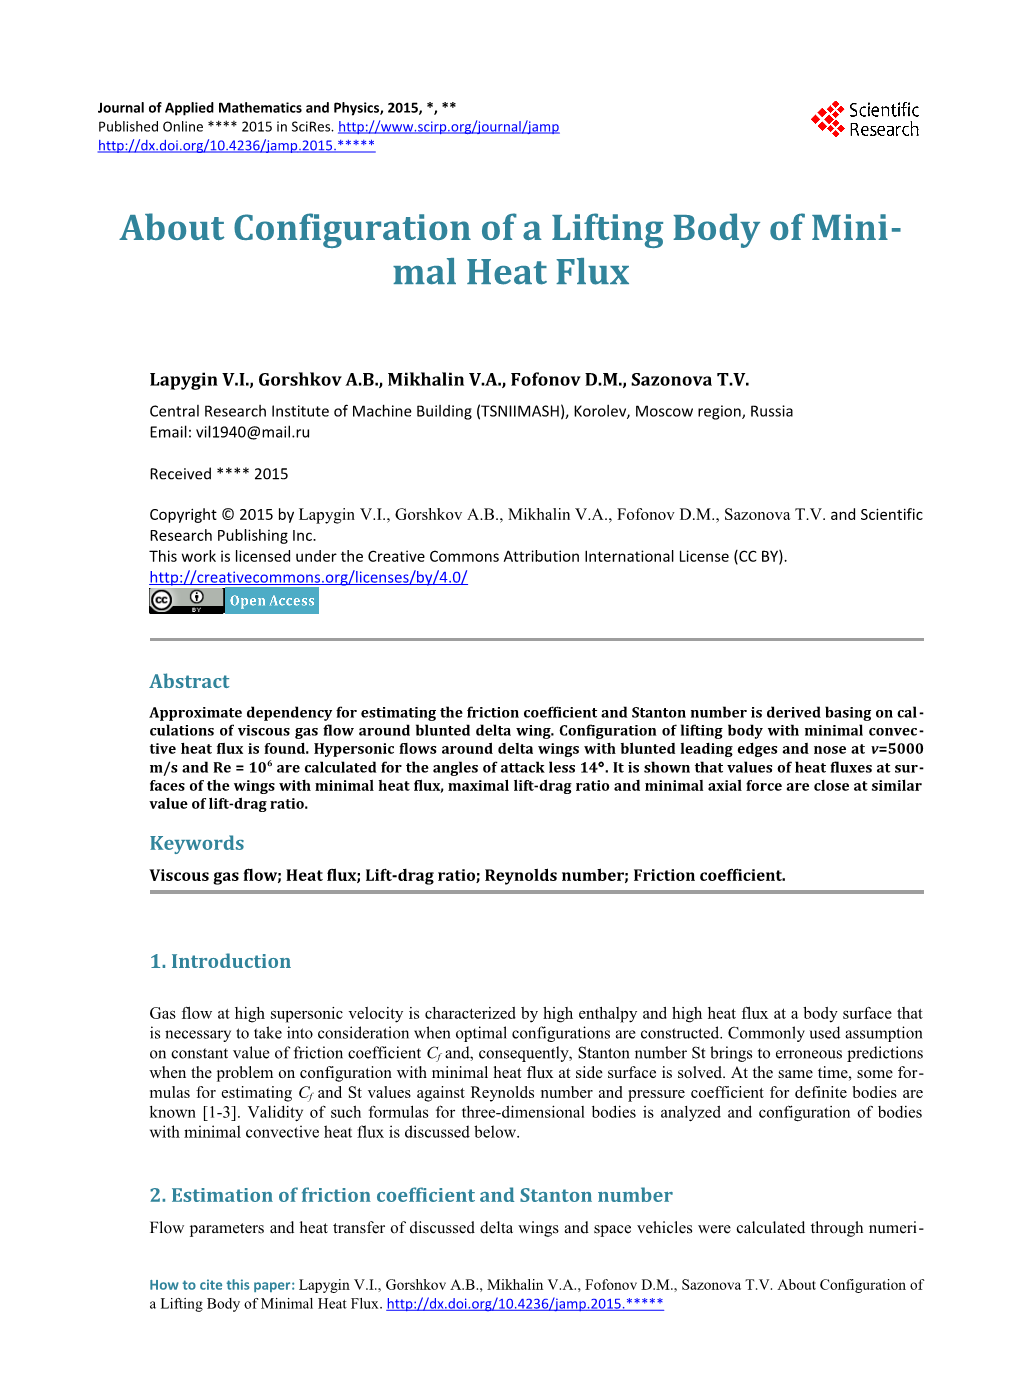 About Configuration of a Lifting Body of Mini-Mal Heat Flux